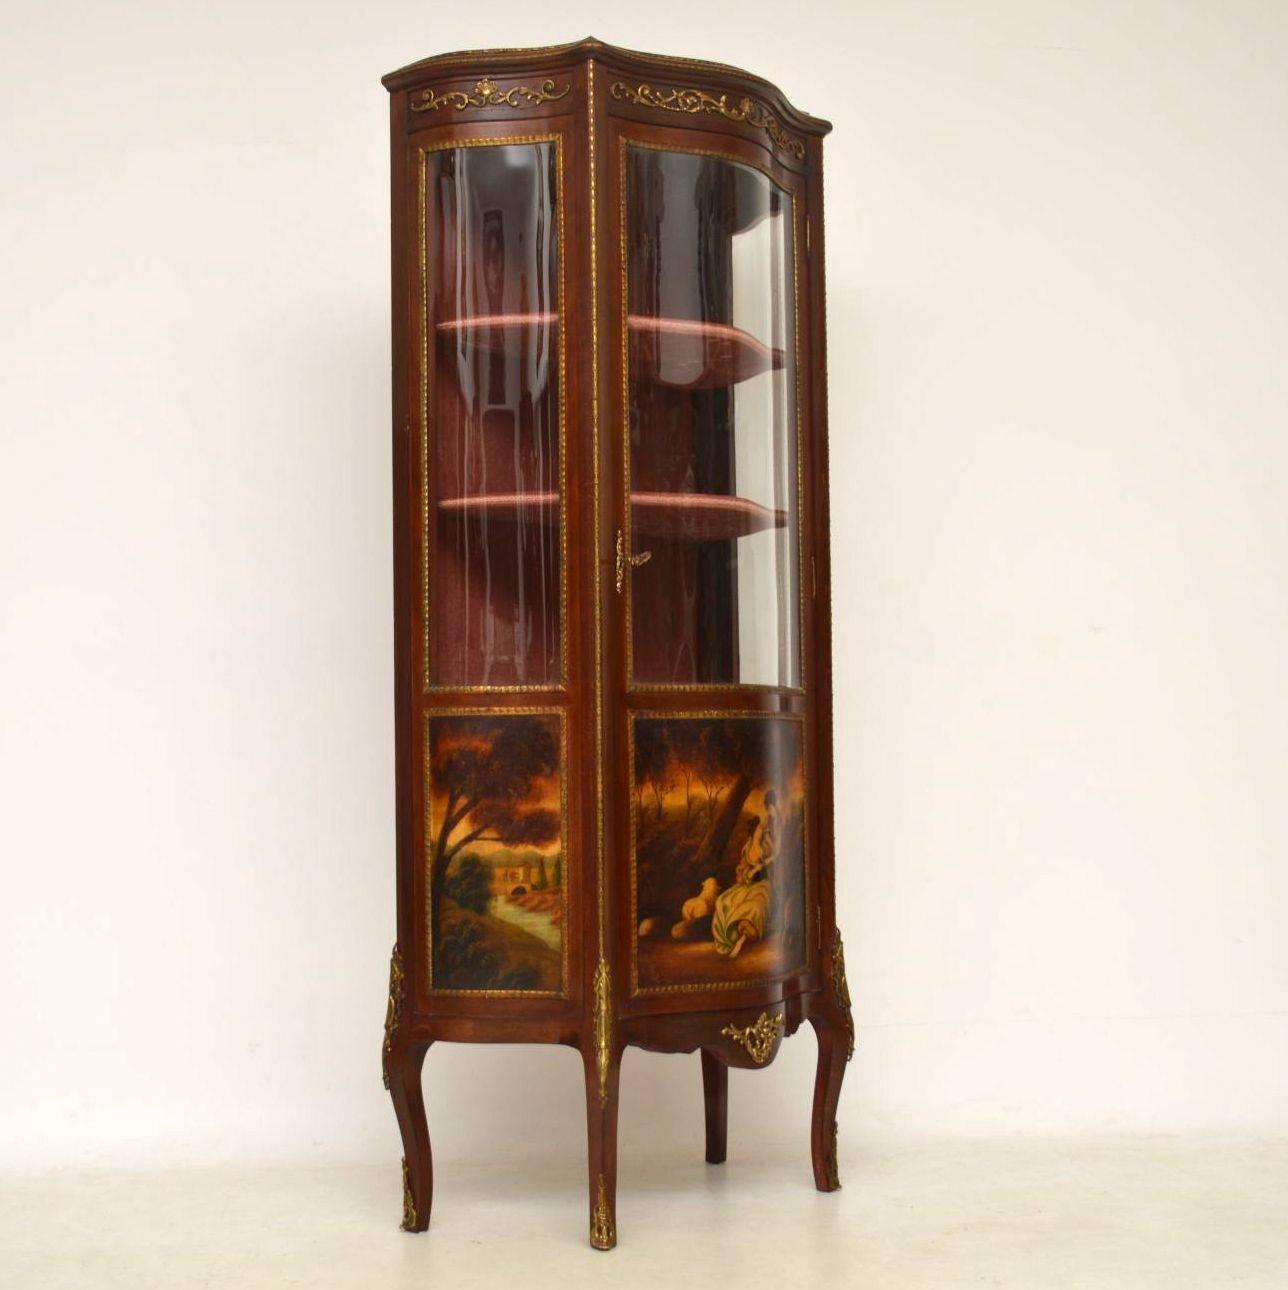 Antique French style display cabinet with a serpentine shaped front in mahogany and with decorative scenes on the bottom panels. There are also a lot of gilt bronze mounts all over this cabinet. It's in good original condition and still has the